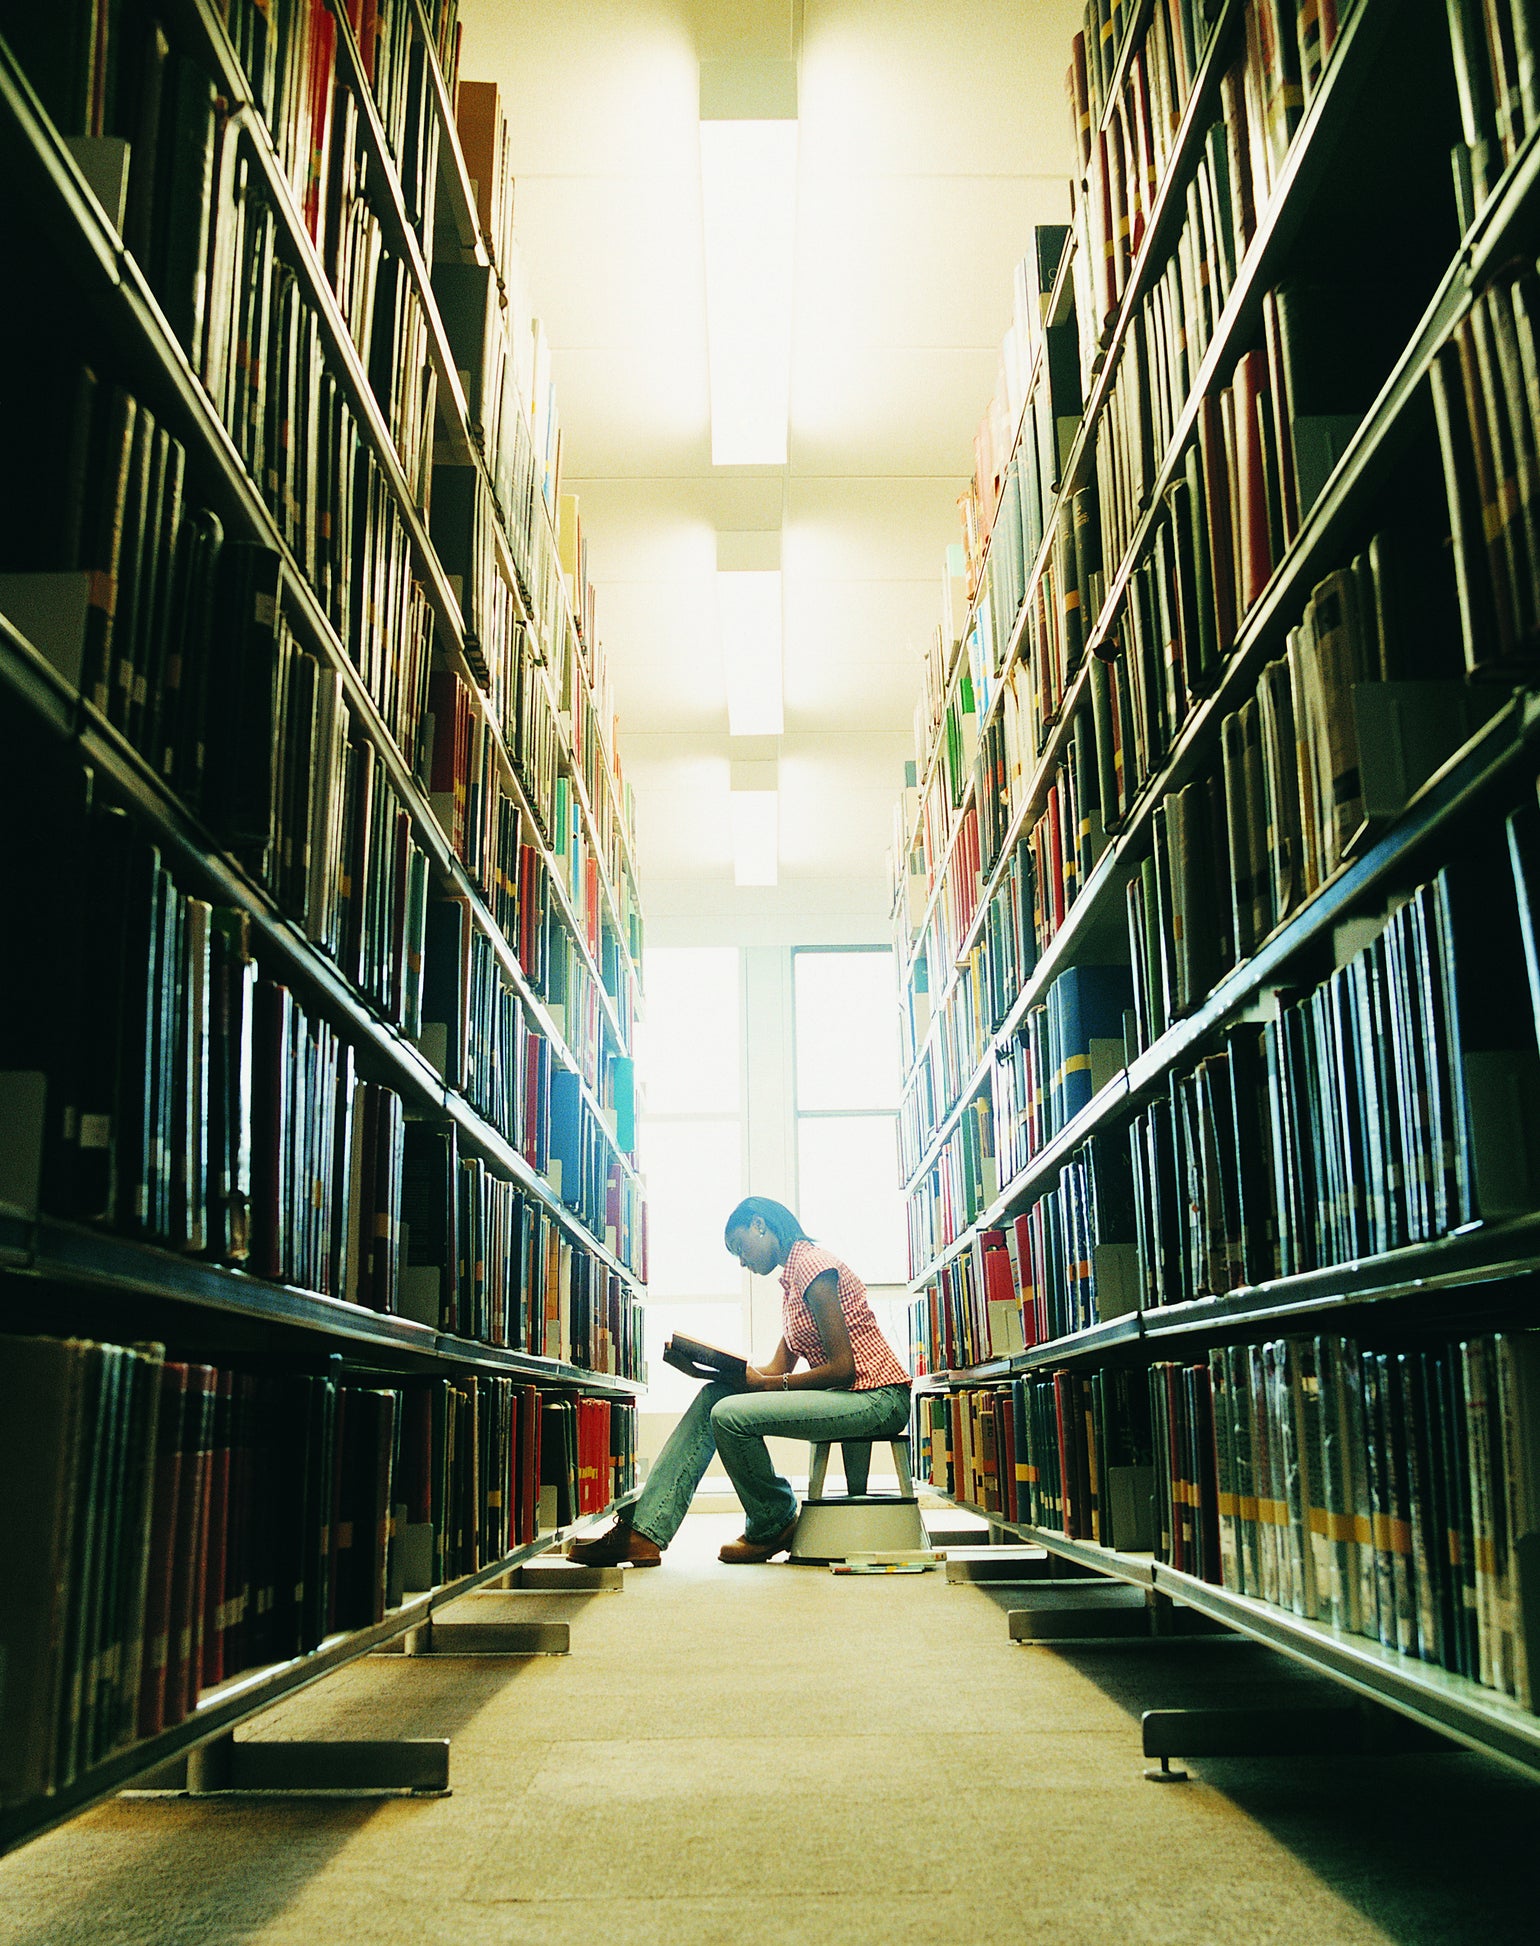 It's more than just books: now is the perfect time to get back to the library